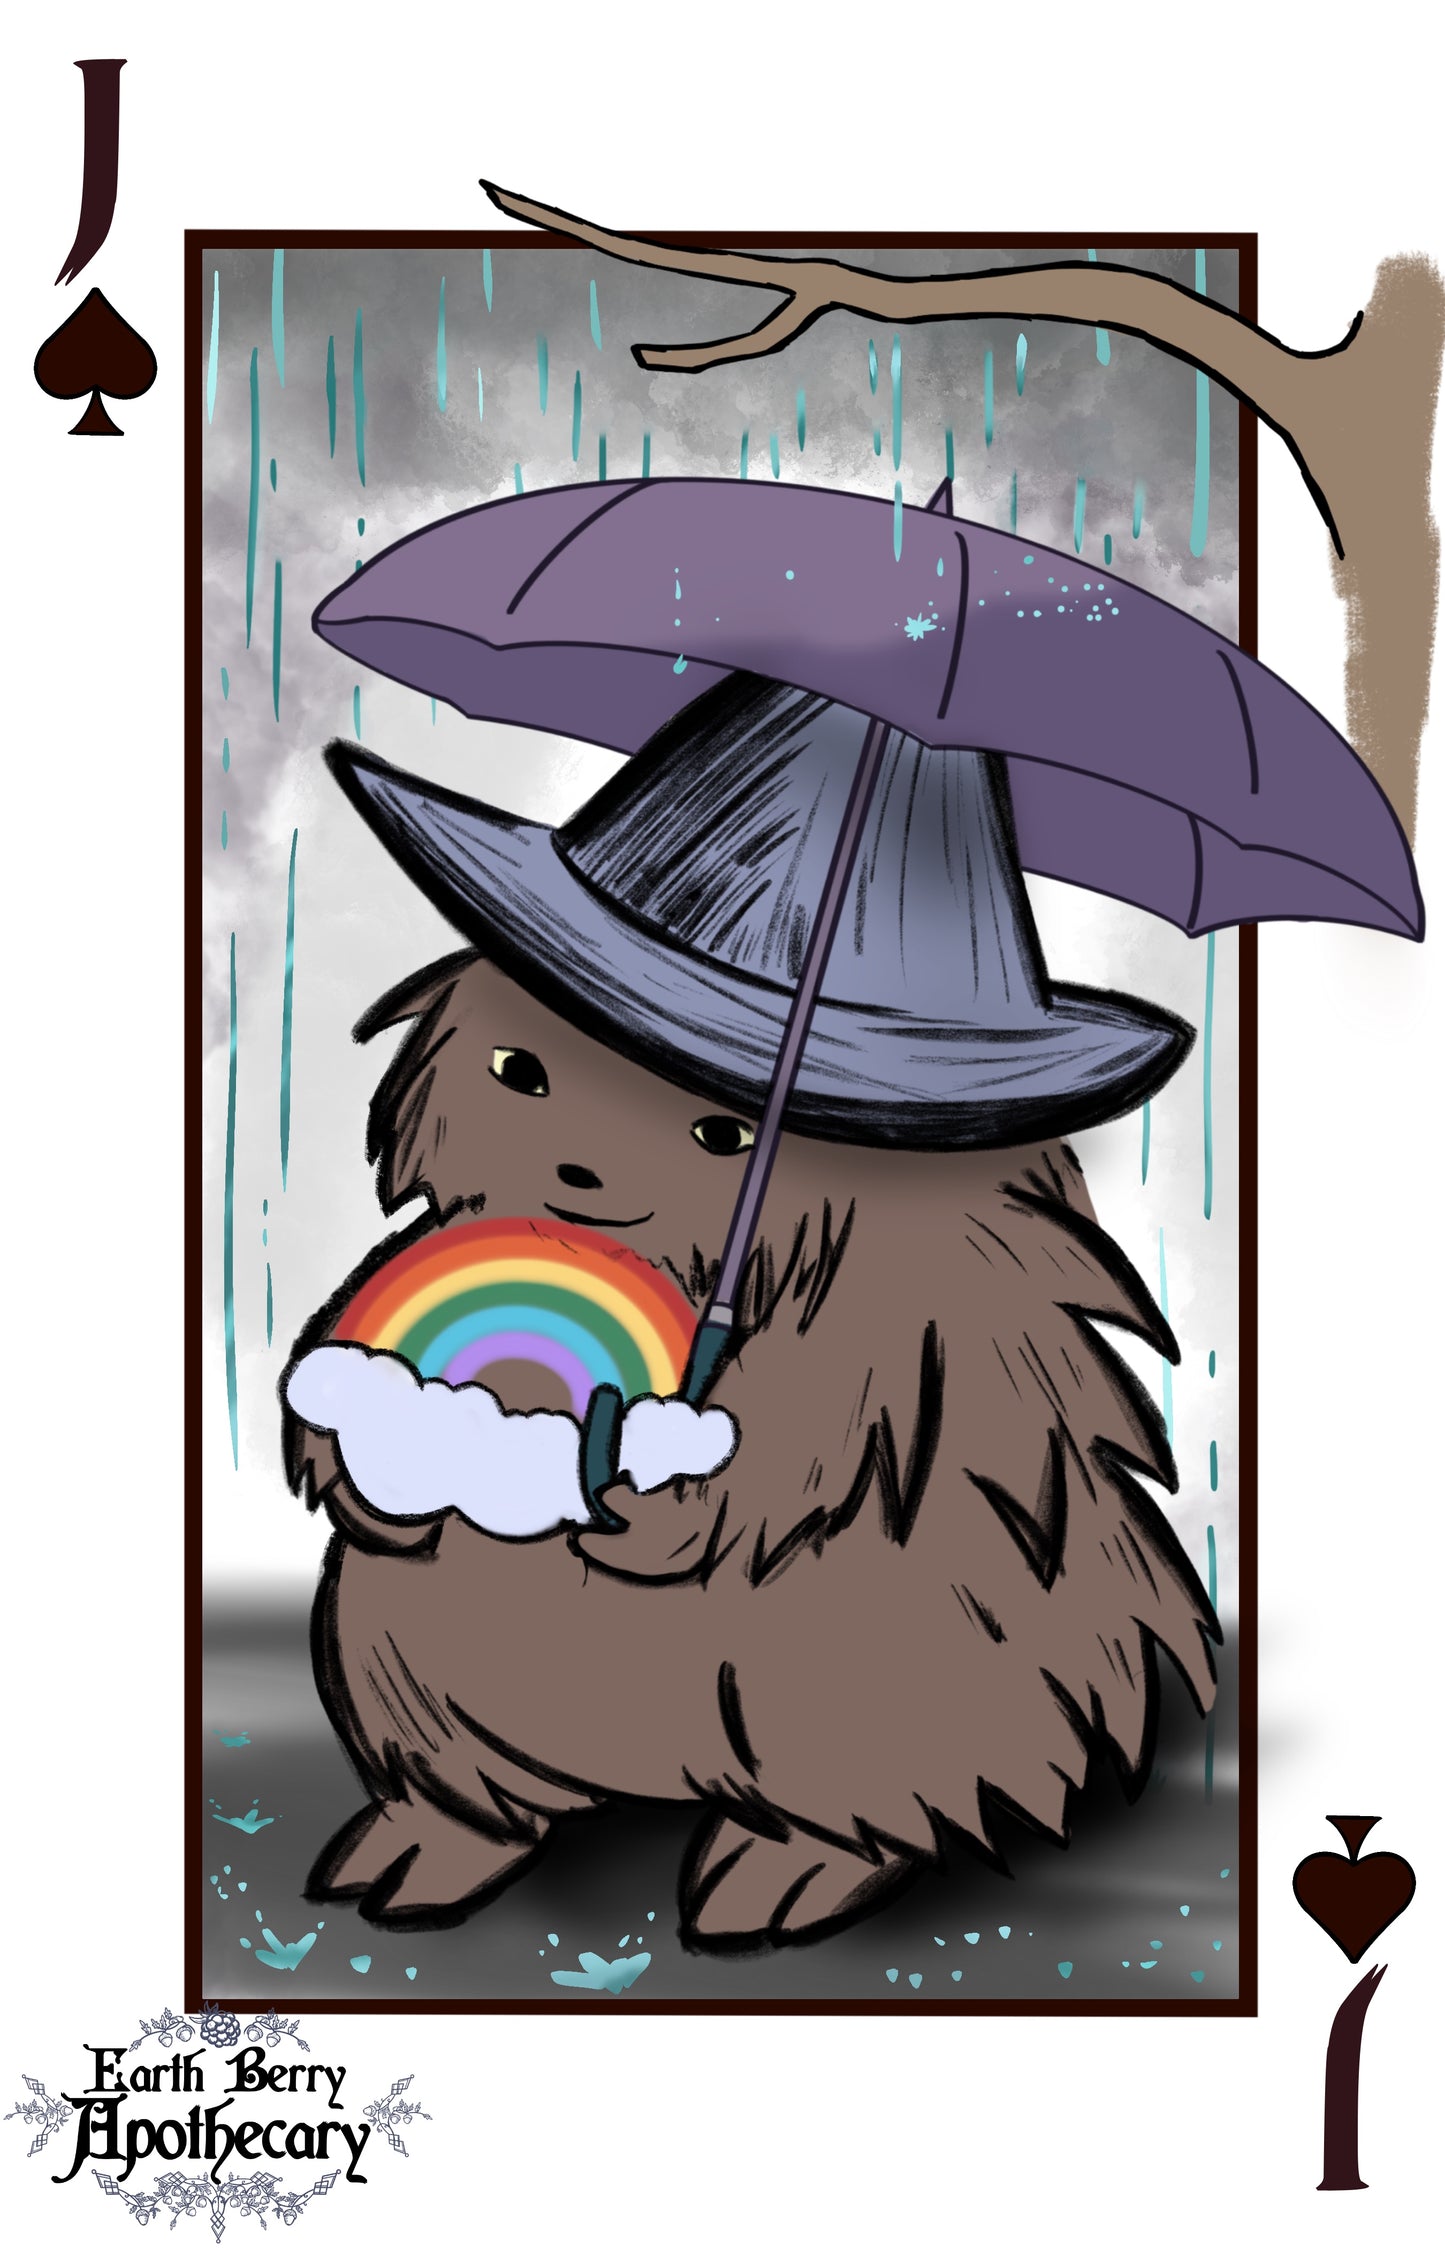 Fantasy themed playing cards. The Jack of spades playing card depicts the hedge witch under a purple umbrella on a rainy day. She holds a beautiful rainbow.